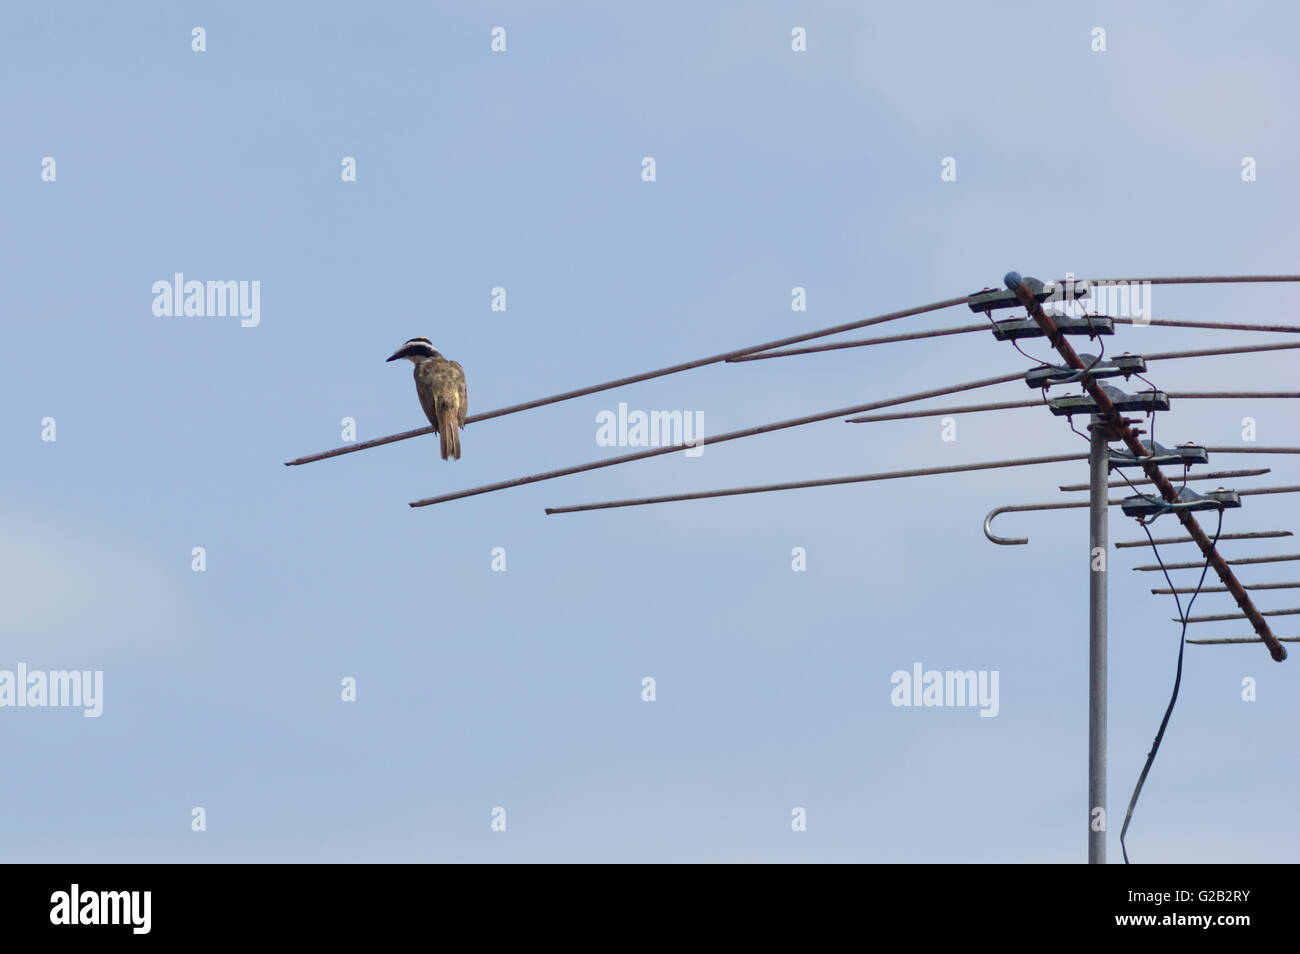 Costa Rican Boat Billed fly catcher on a TV antenna Stock Photo